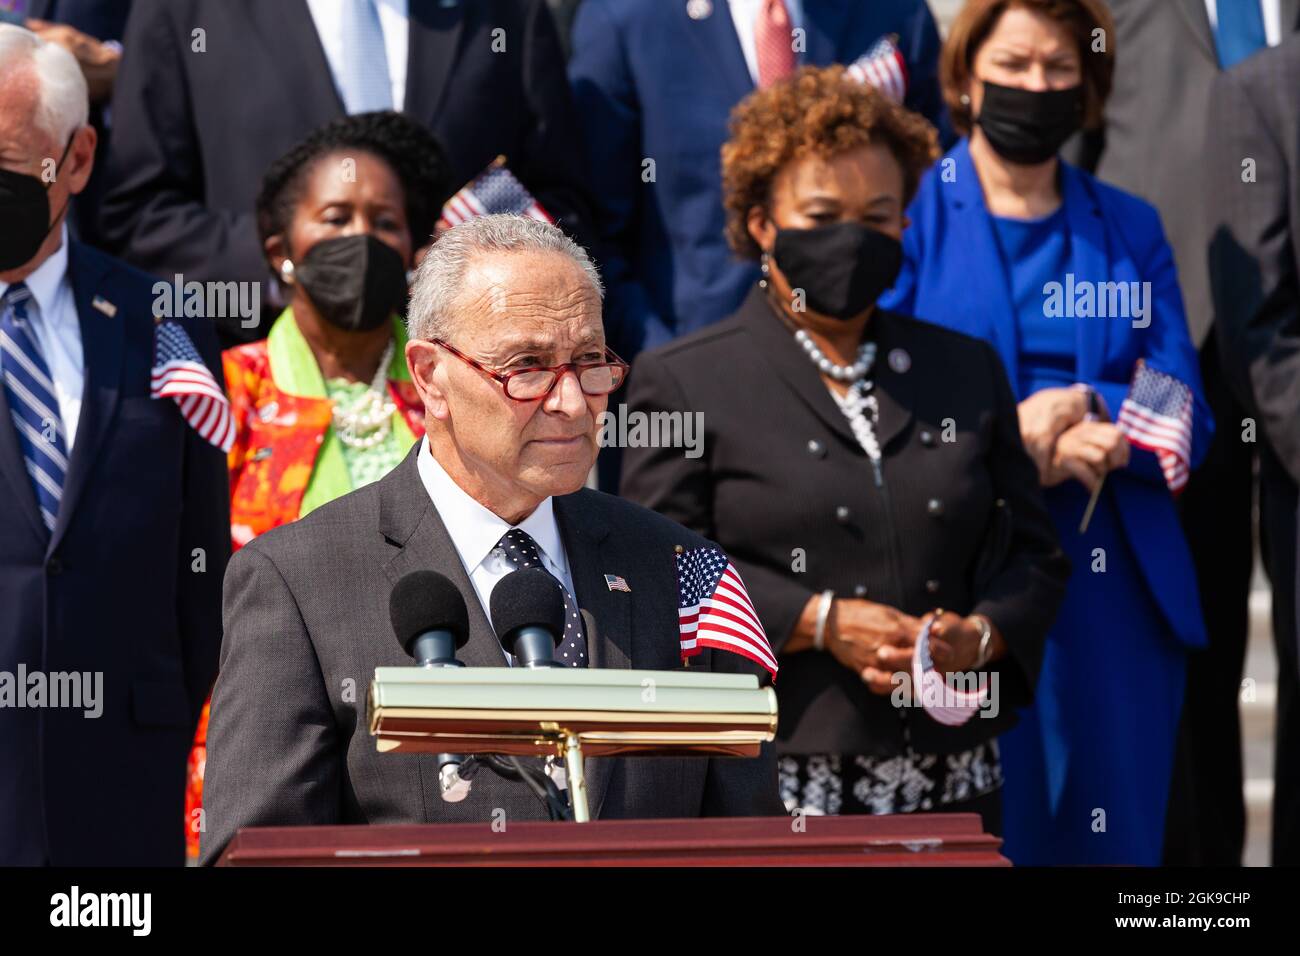 Washington DC, USA. 13th Sep 2021. Senate Majority Leader Chuck Schumer, Democrat of New York, speaks during a ceremony on the Capitol steps in remembrance of the victims of the September 11th attacks. Credit: Allison Bailey/Alamy Live News Stock Photo